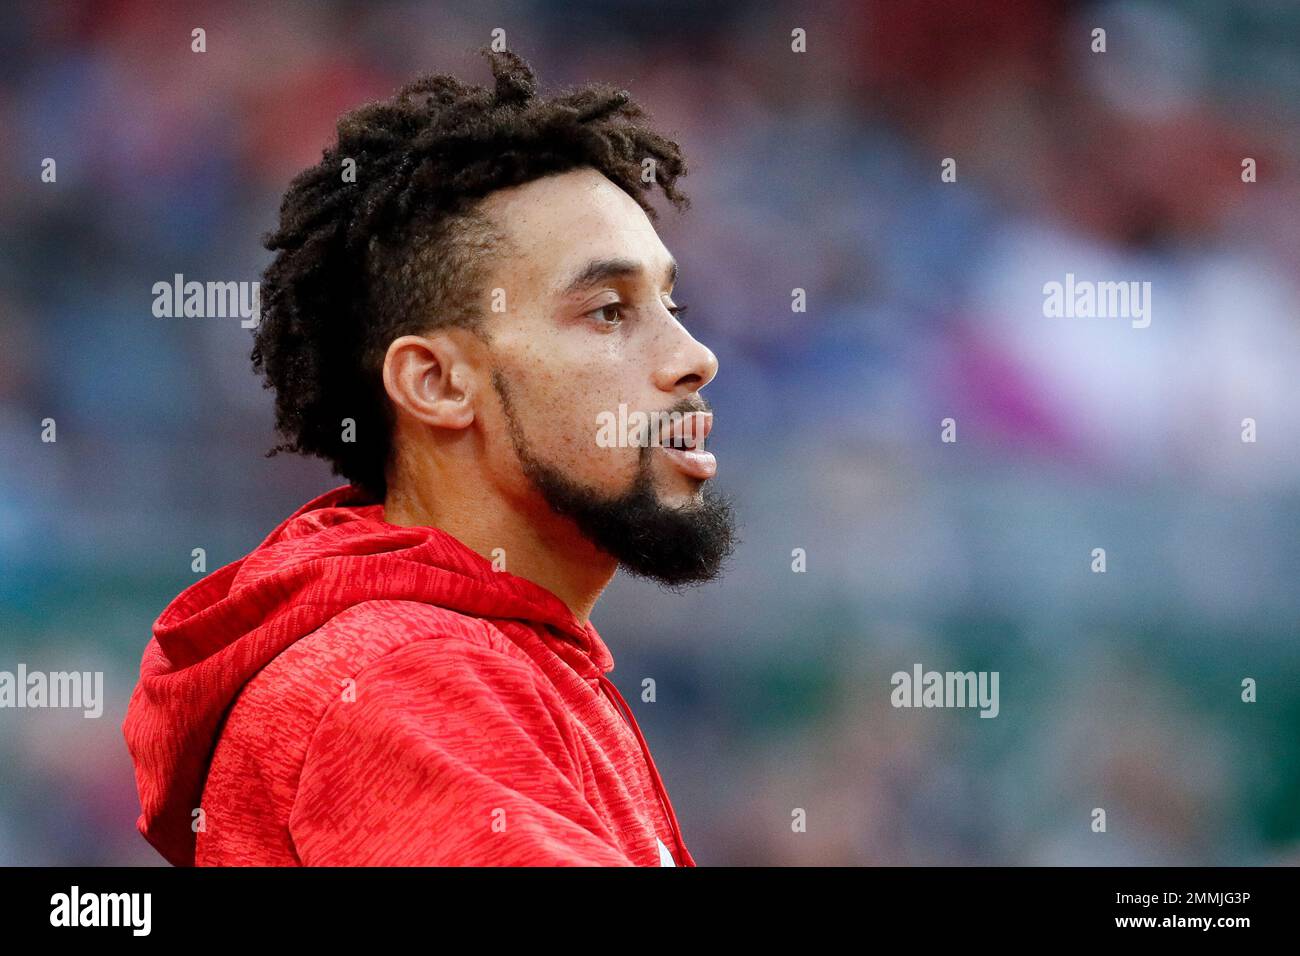 Billy Hamilton of the Chicago White Sox stands in the dugout prior